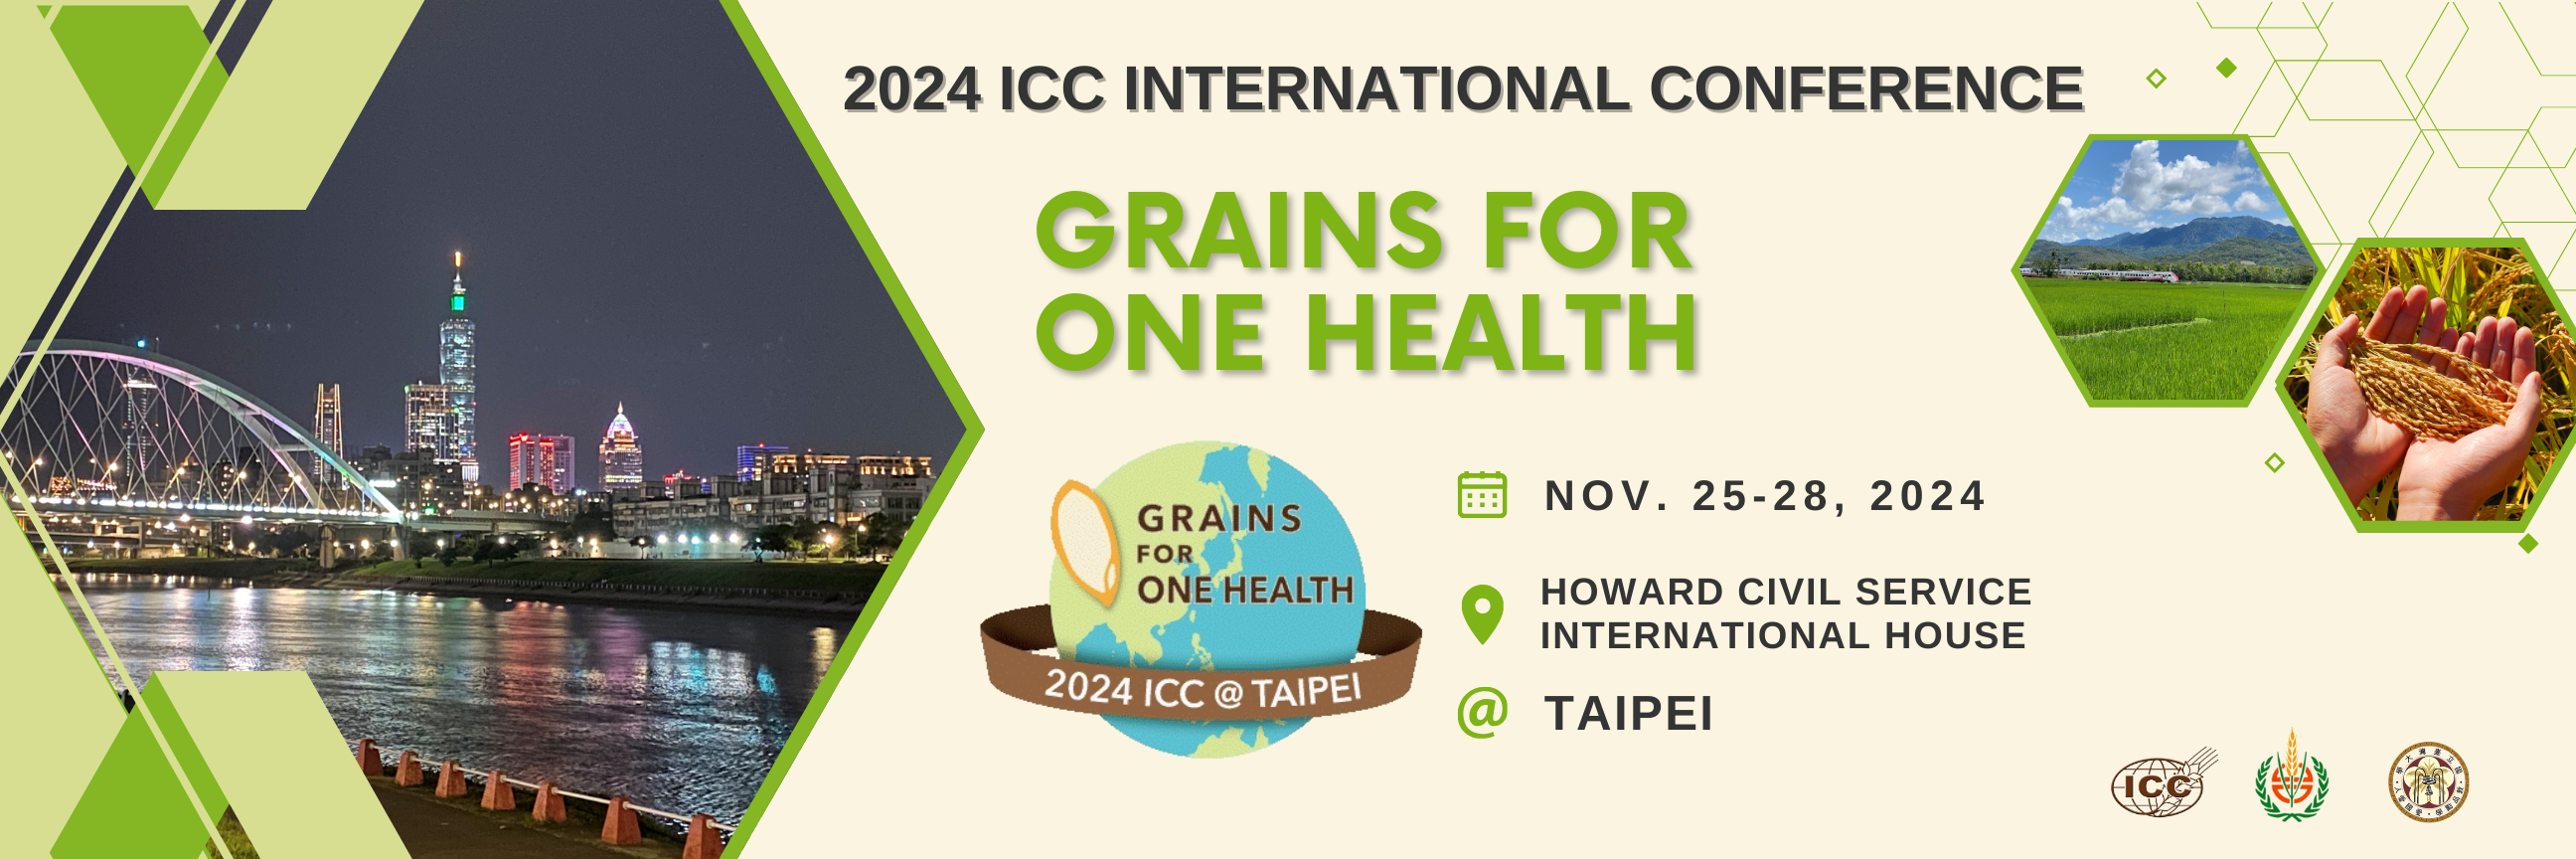 ICC International Conference: Grains For One Health, 25-28 November 2024, Taipei